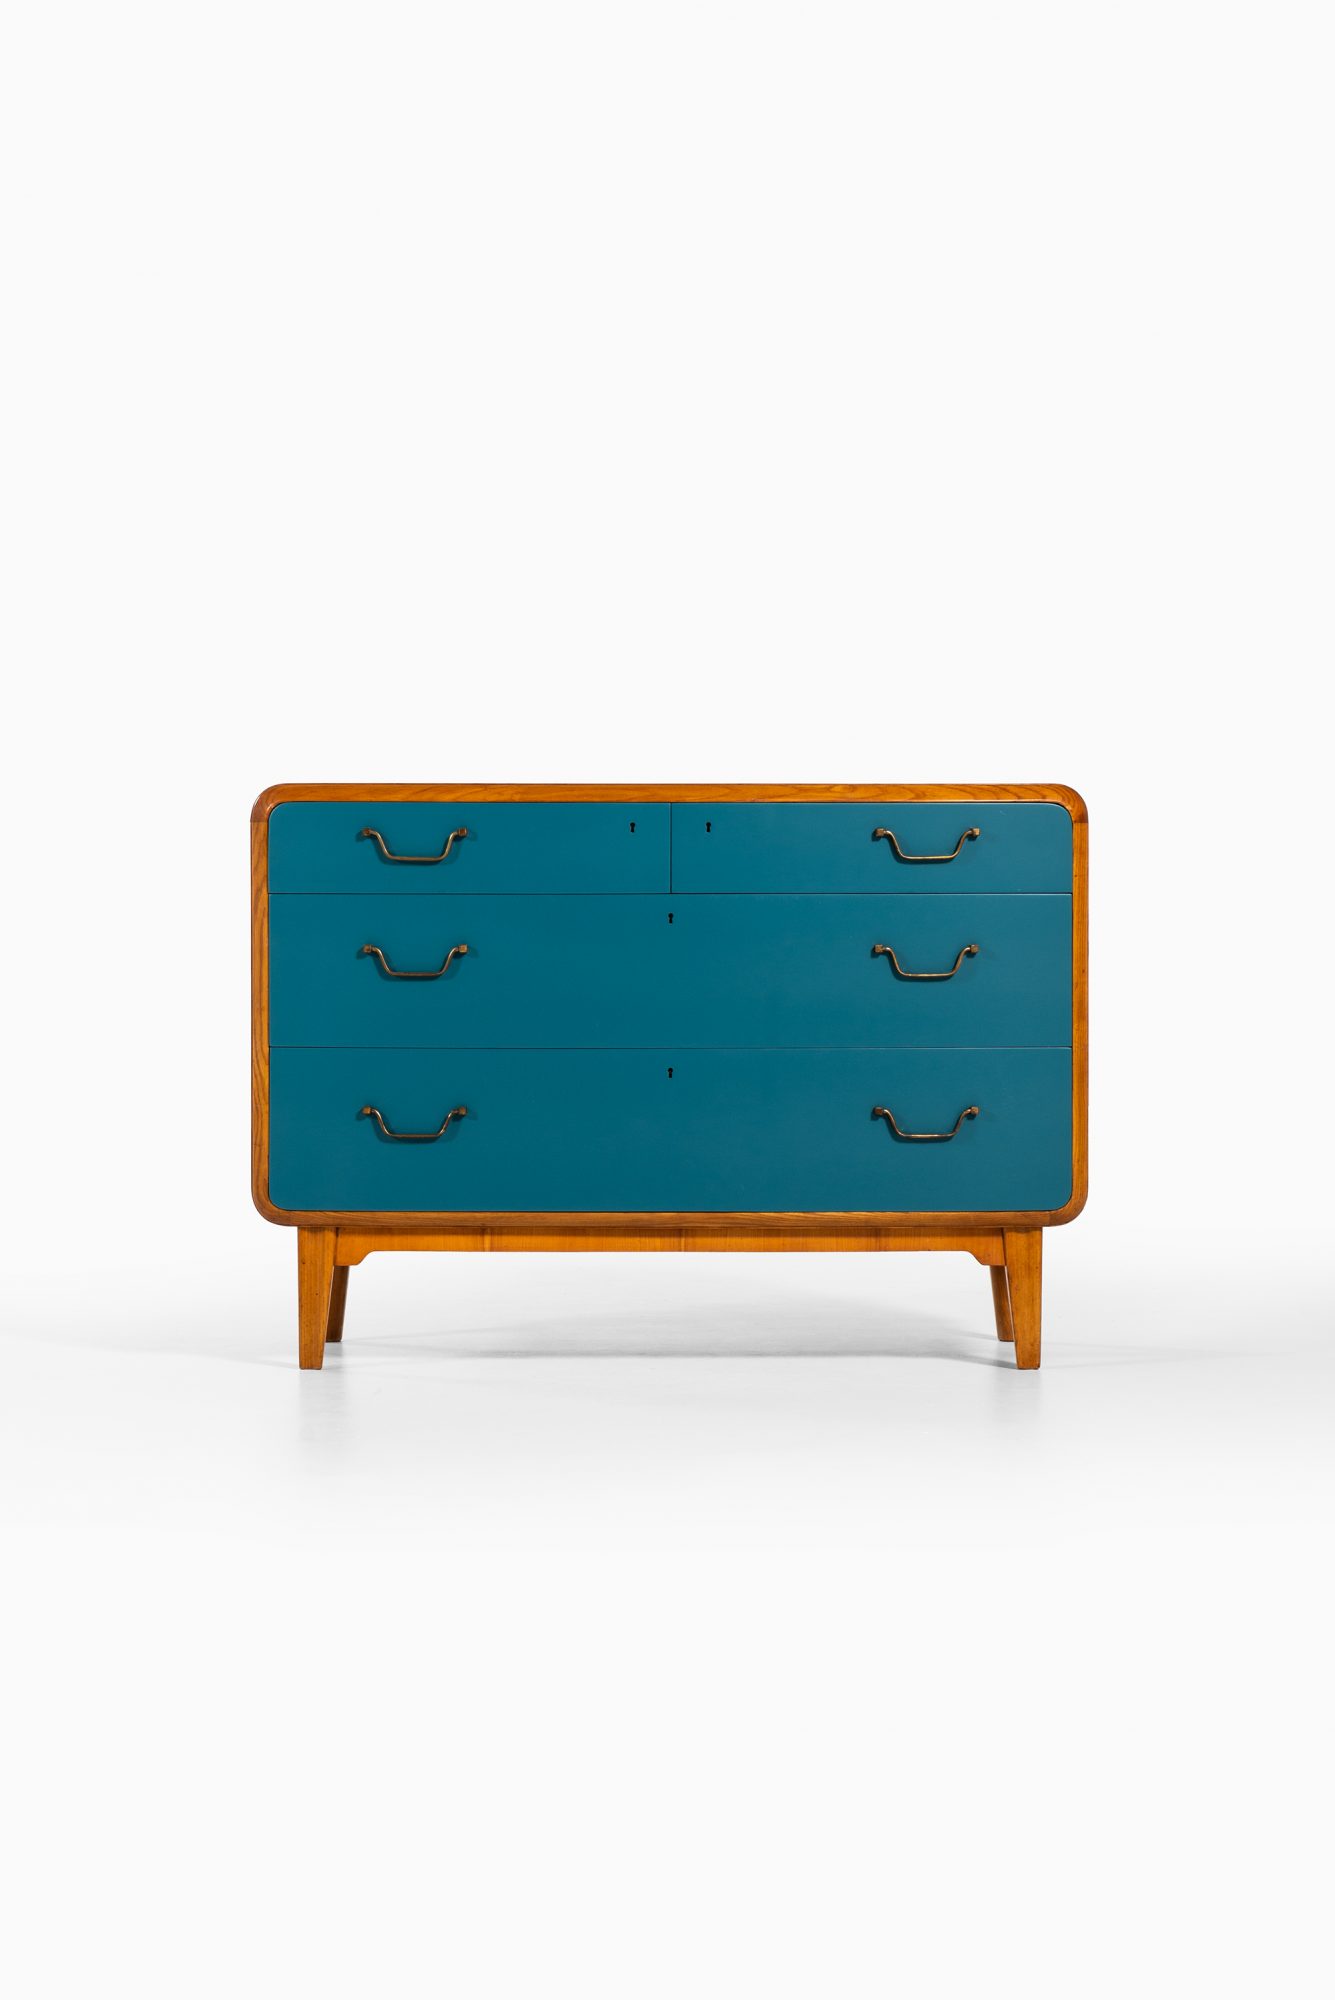 Axel Larsson bureau produced by Bodafors at Studio Schalling